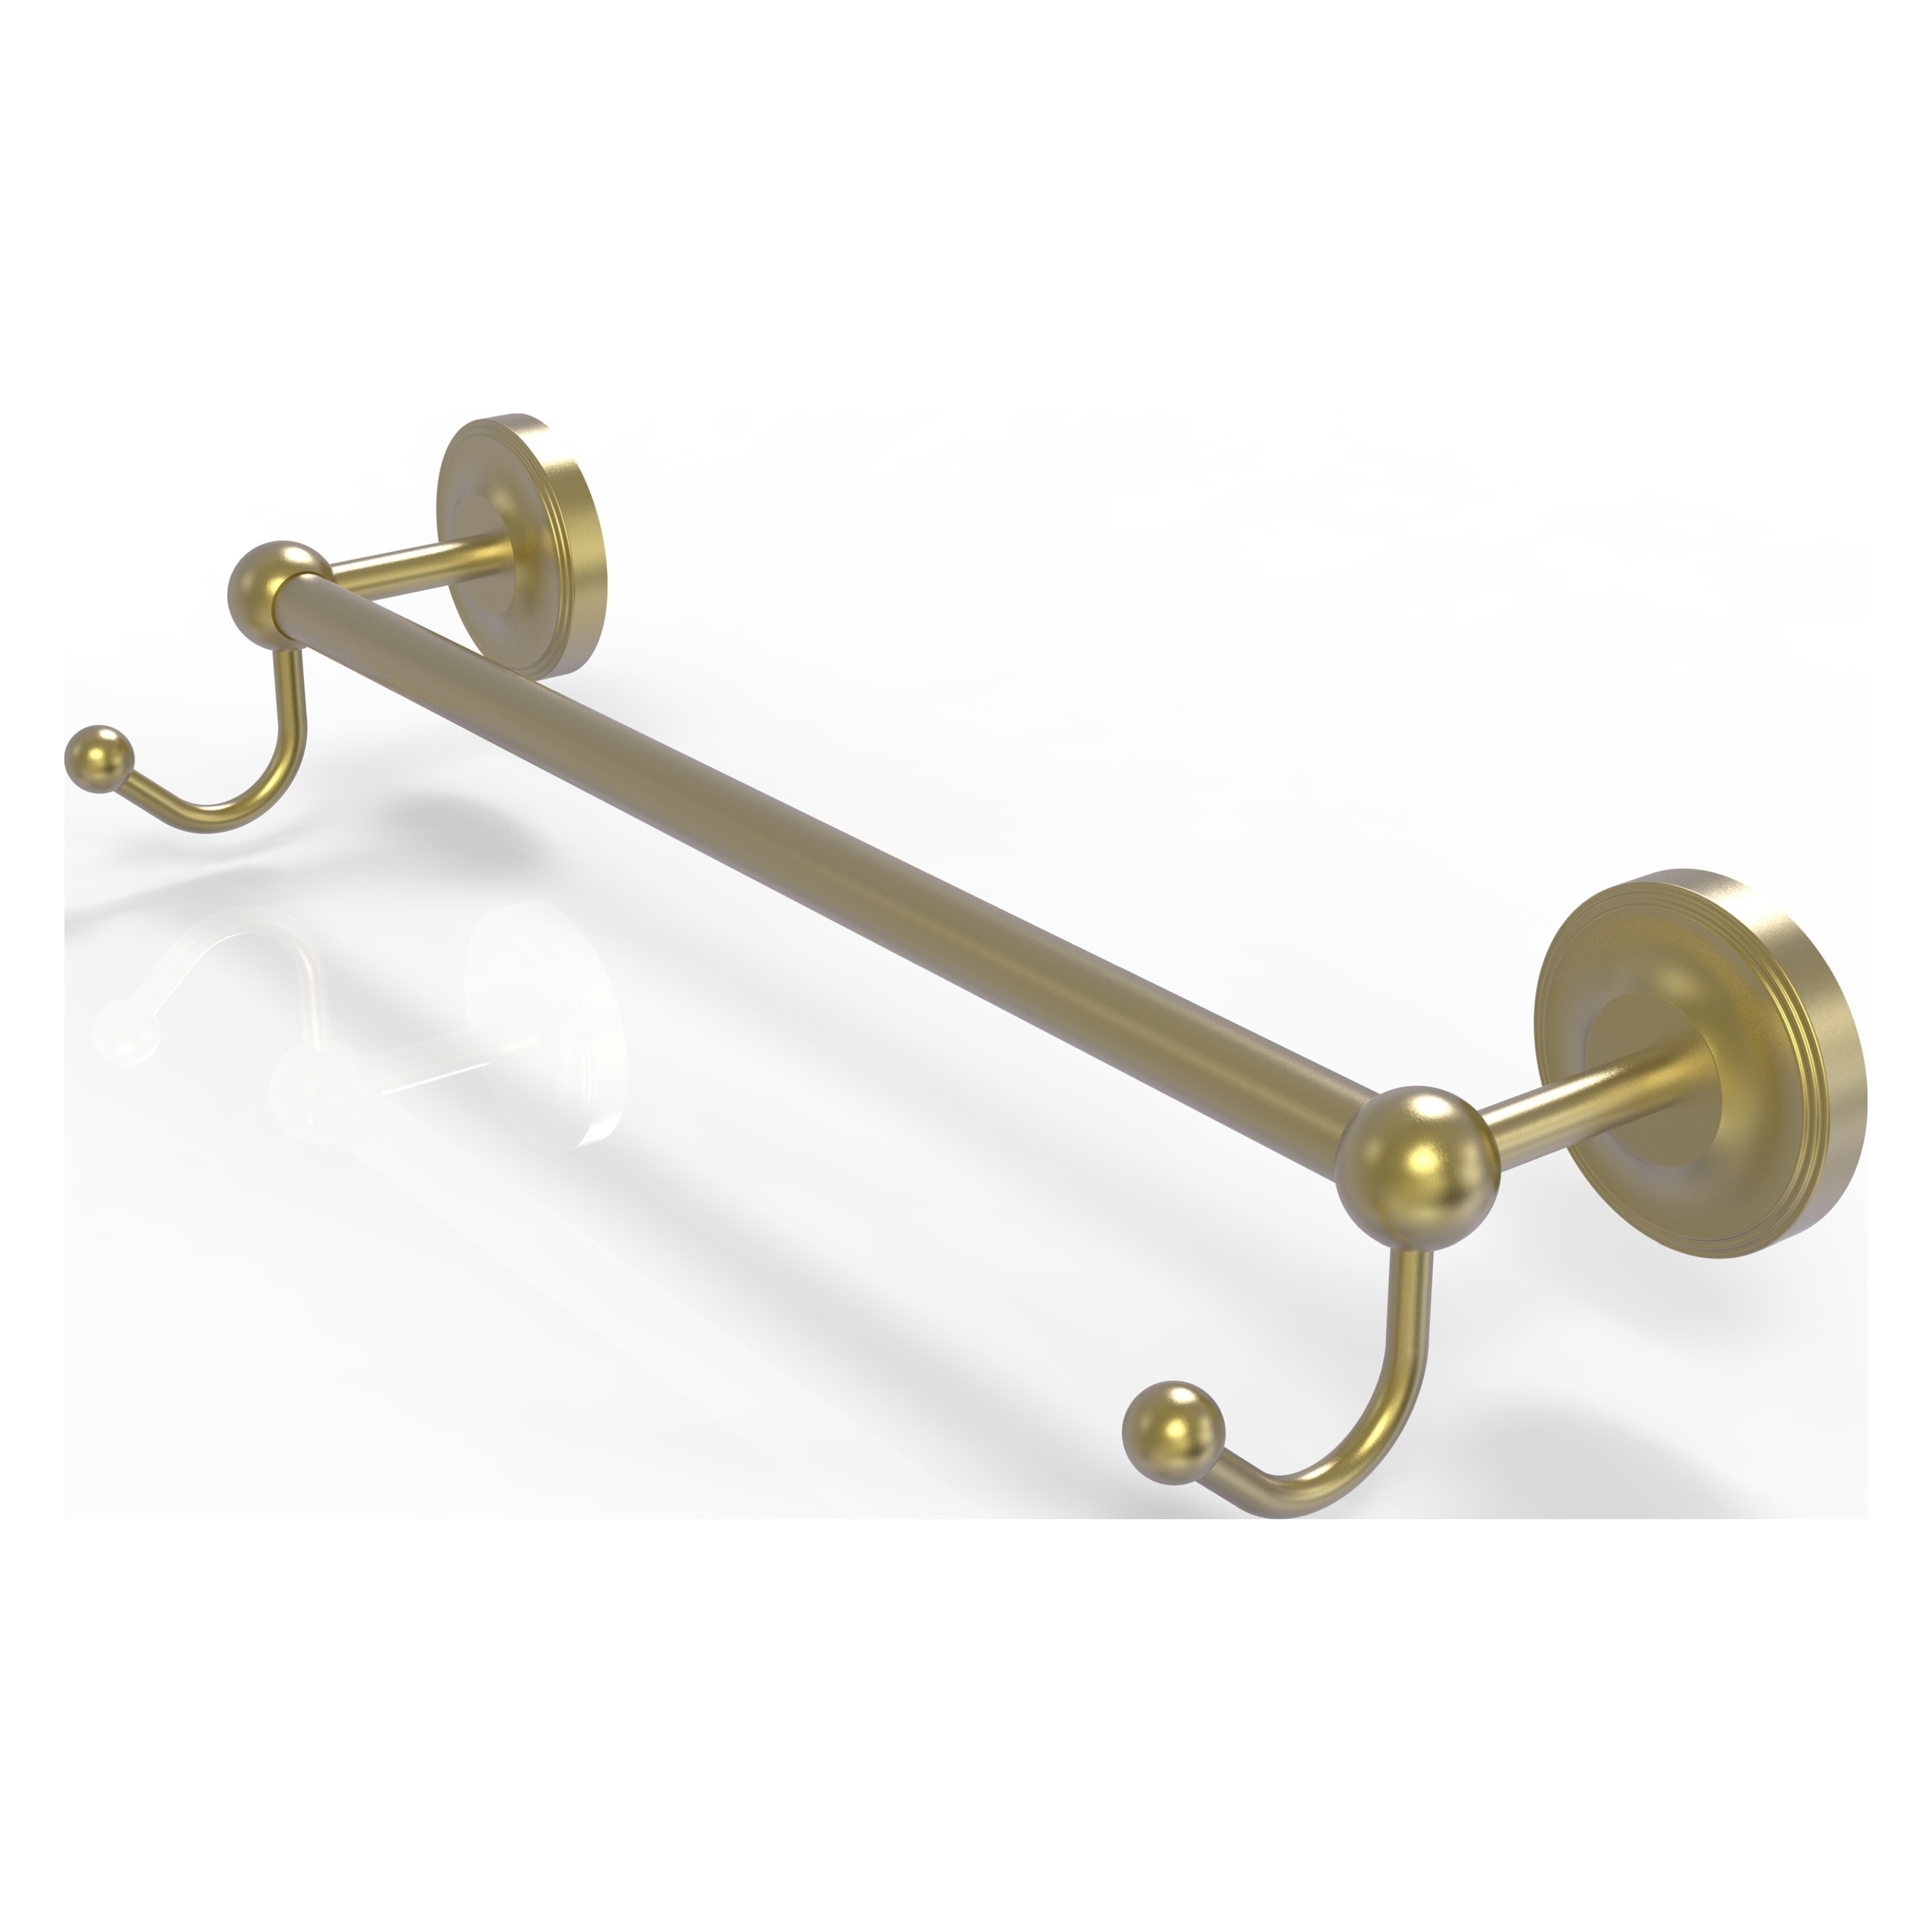 Buy VOS Towel Rail 30cm - Brushed Brass Bathroom Accessories Online Today